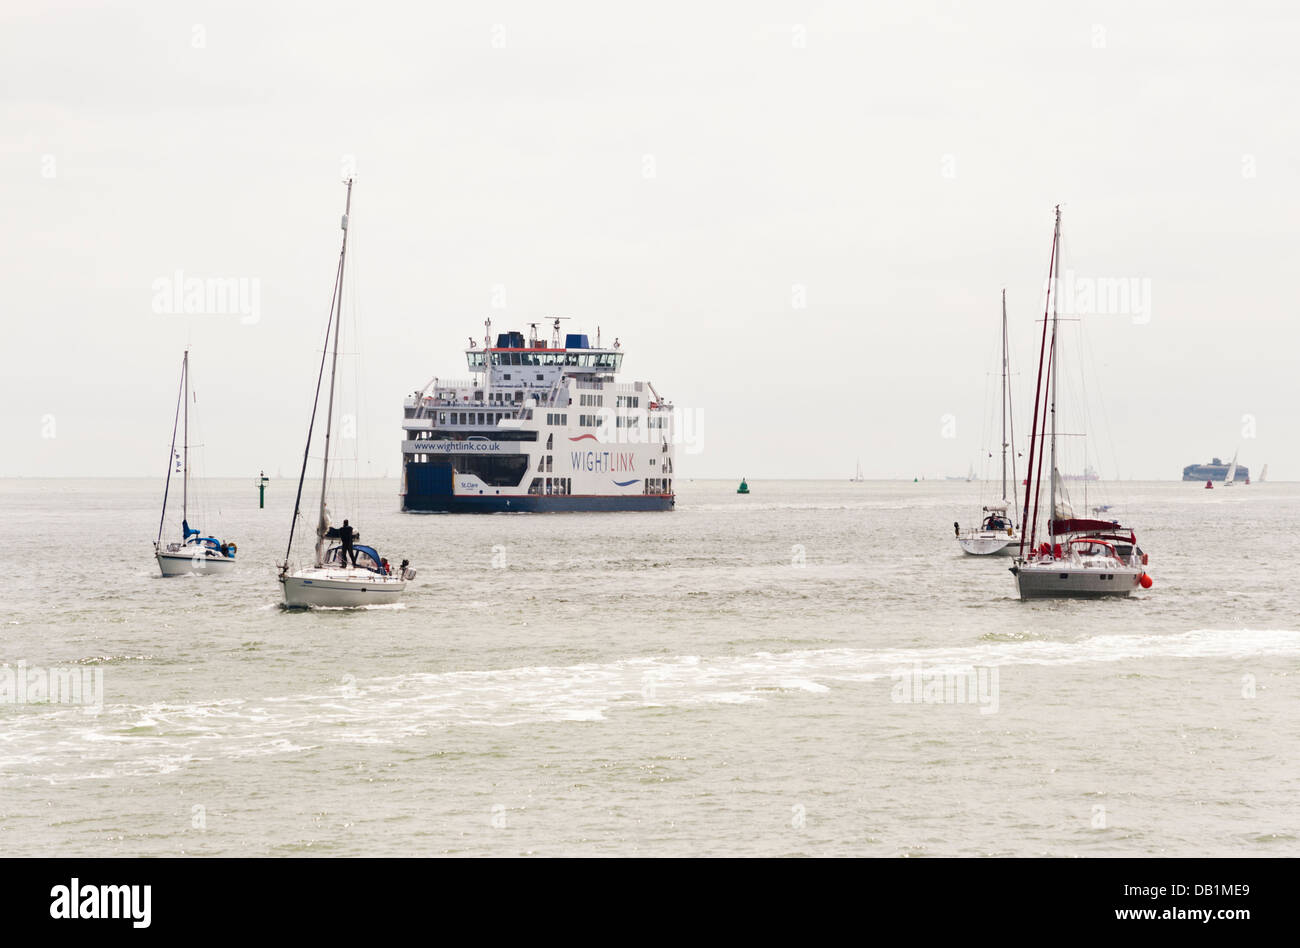 An Isle of Wight ferry and sailing boats pass in Portsmouth Harbour, UK. Stock Photo